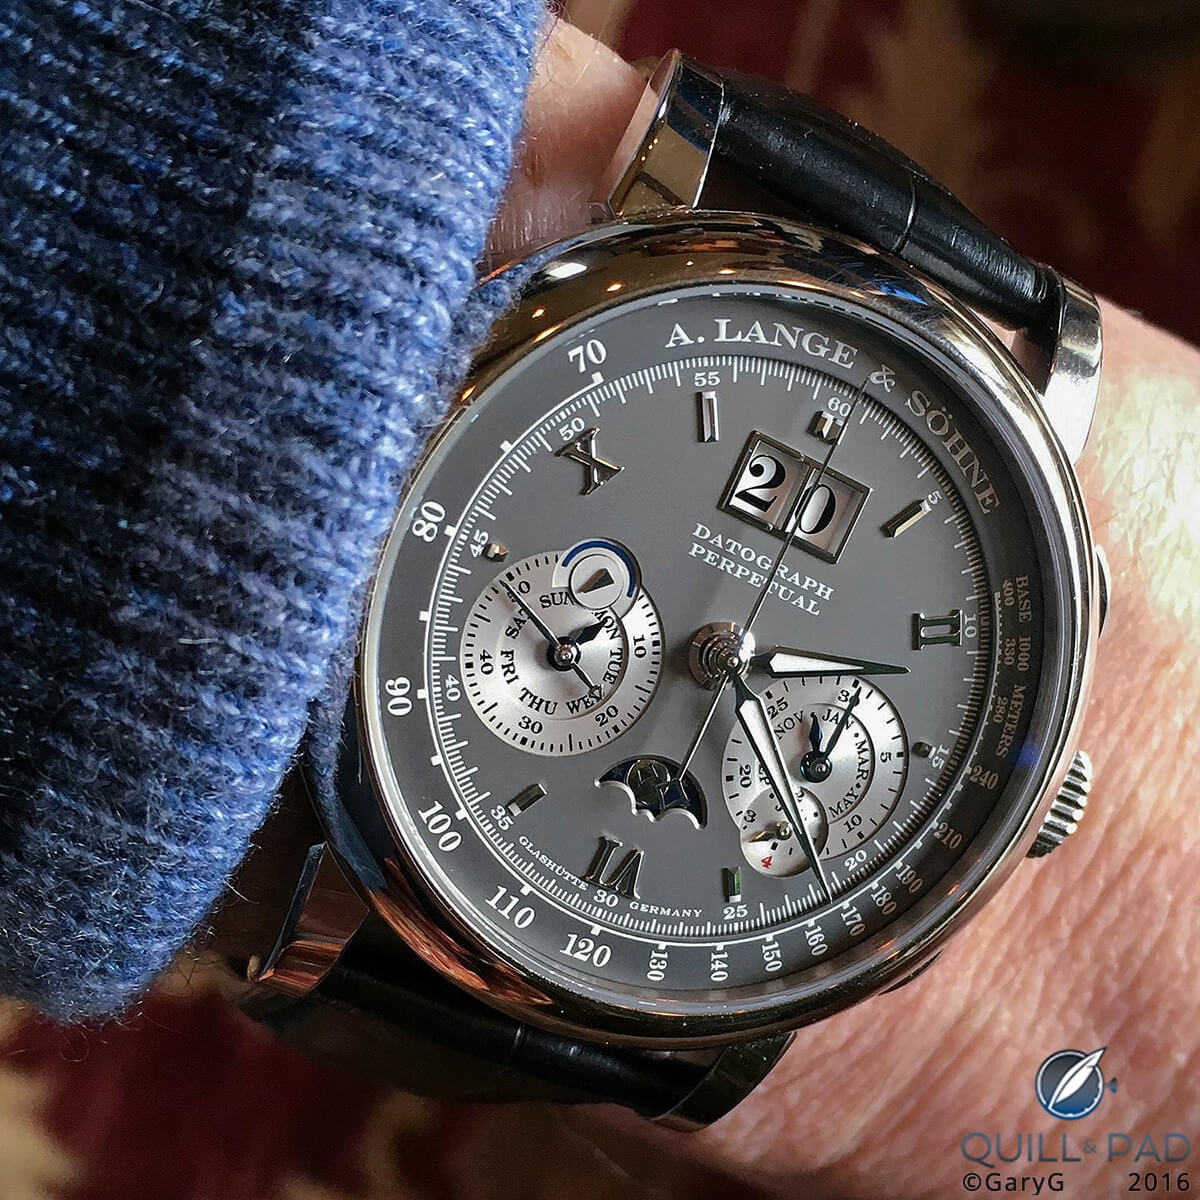 On the wrist: the author’s A. Lange & Söhne Datograph Perpetual